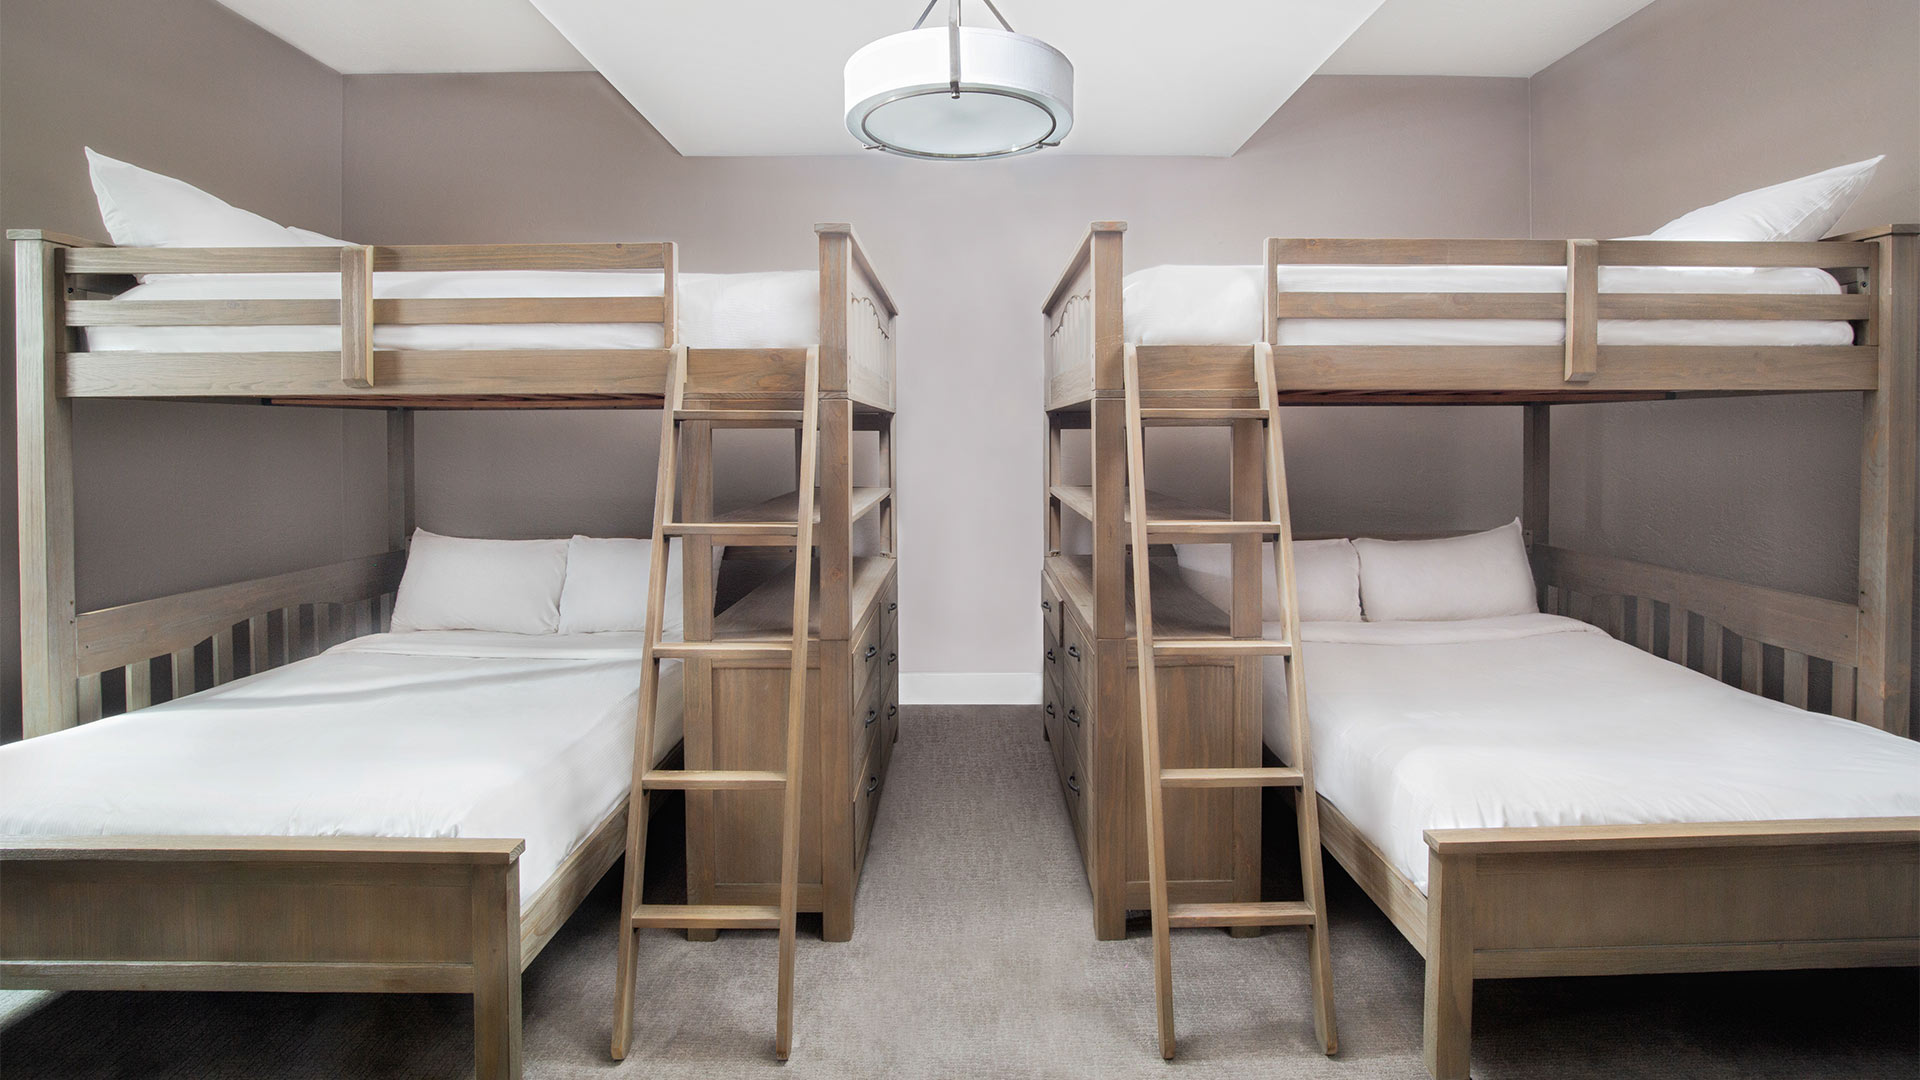 interior shot of a dogwood bedroom with two bunk beds on either side of the room. Each bed has all white linens